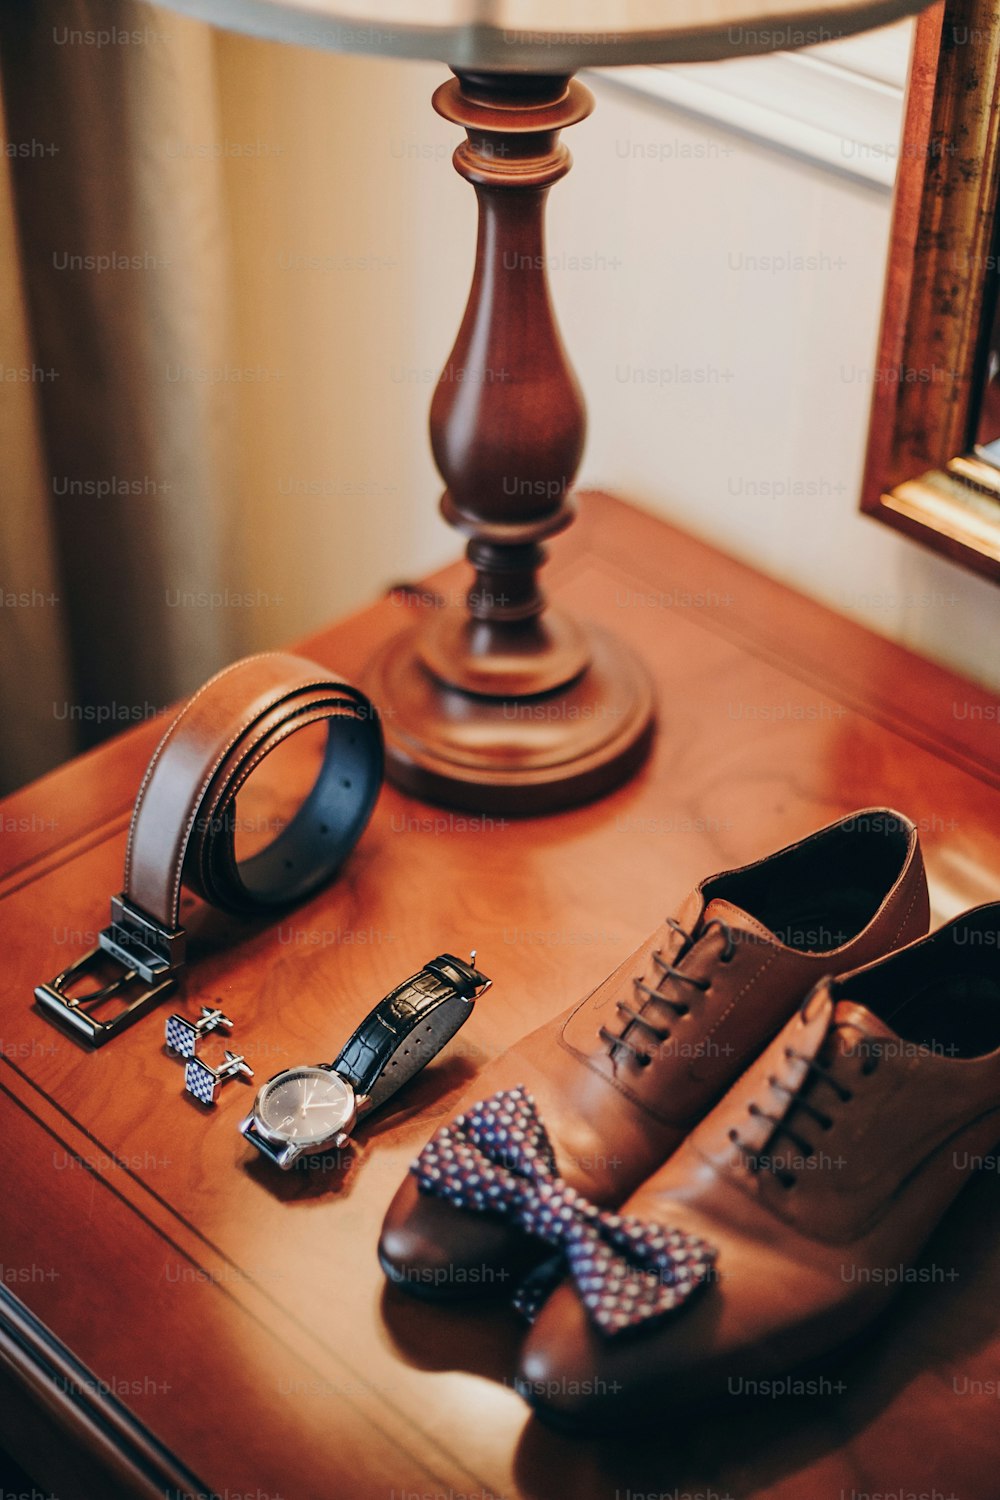 Stylish watch, expensive, shoes, bow tie, cufflinks and belt for groom on wooden table in hotel room. Morning preparation before wedding ceremony. Men accessory for luxury event